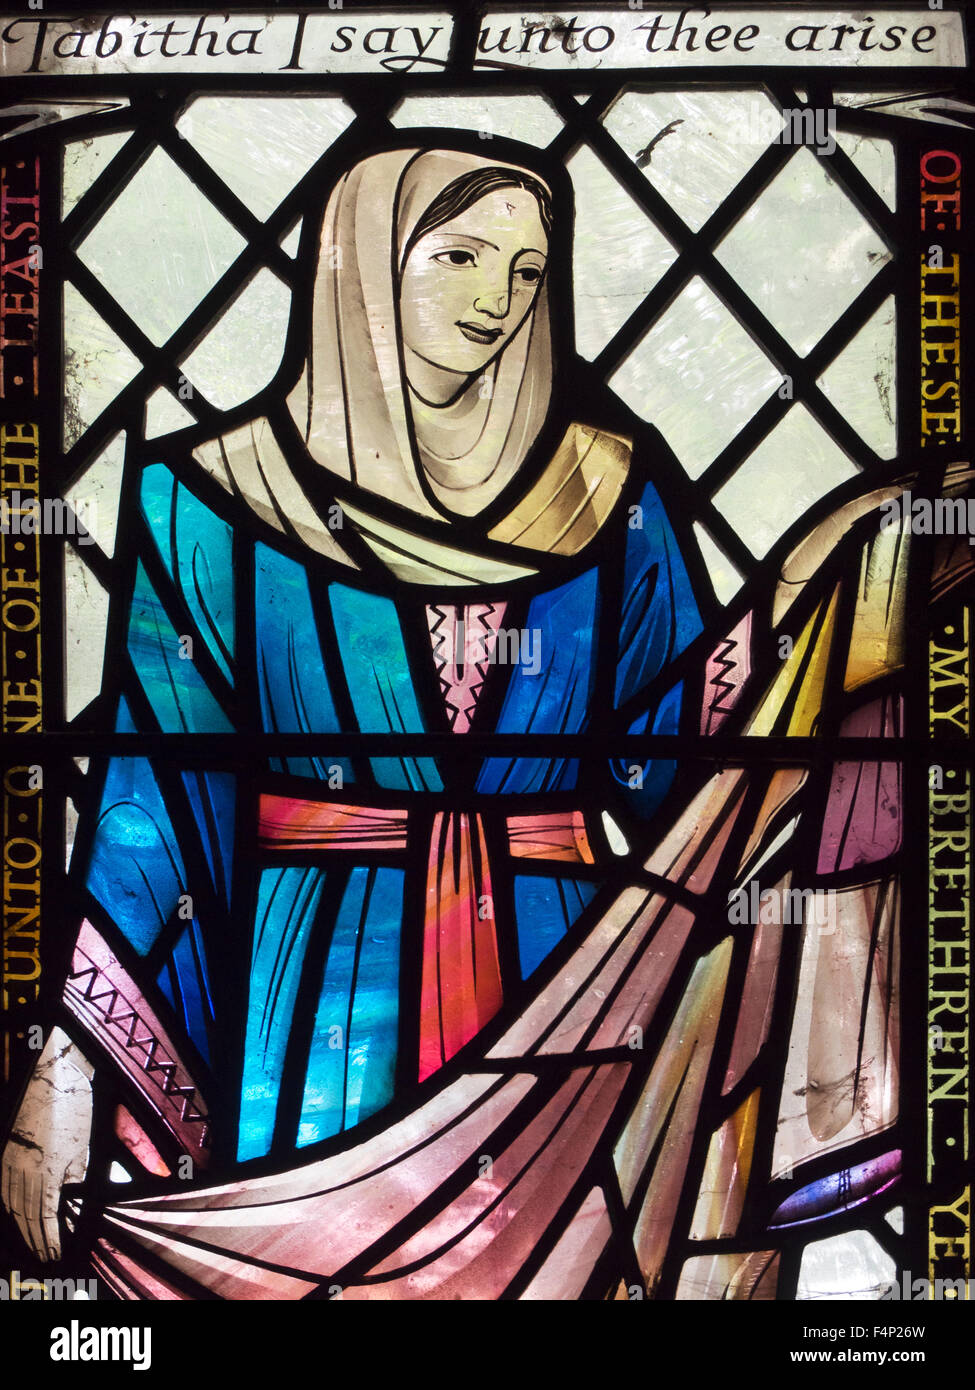 Tabitha I Say Unto Thee Arise Stained Glass Window at St Ebbas Church in Beadnell Northumberland England Stock Photo